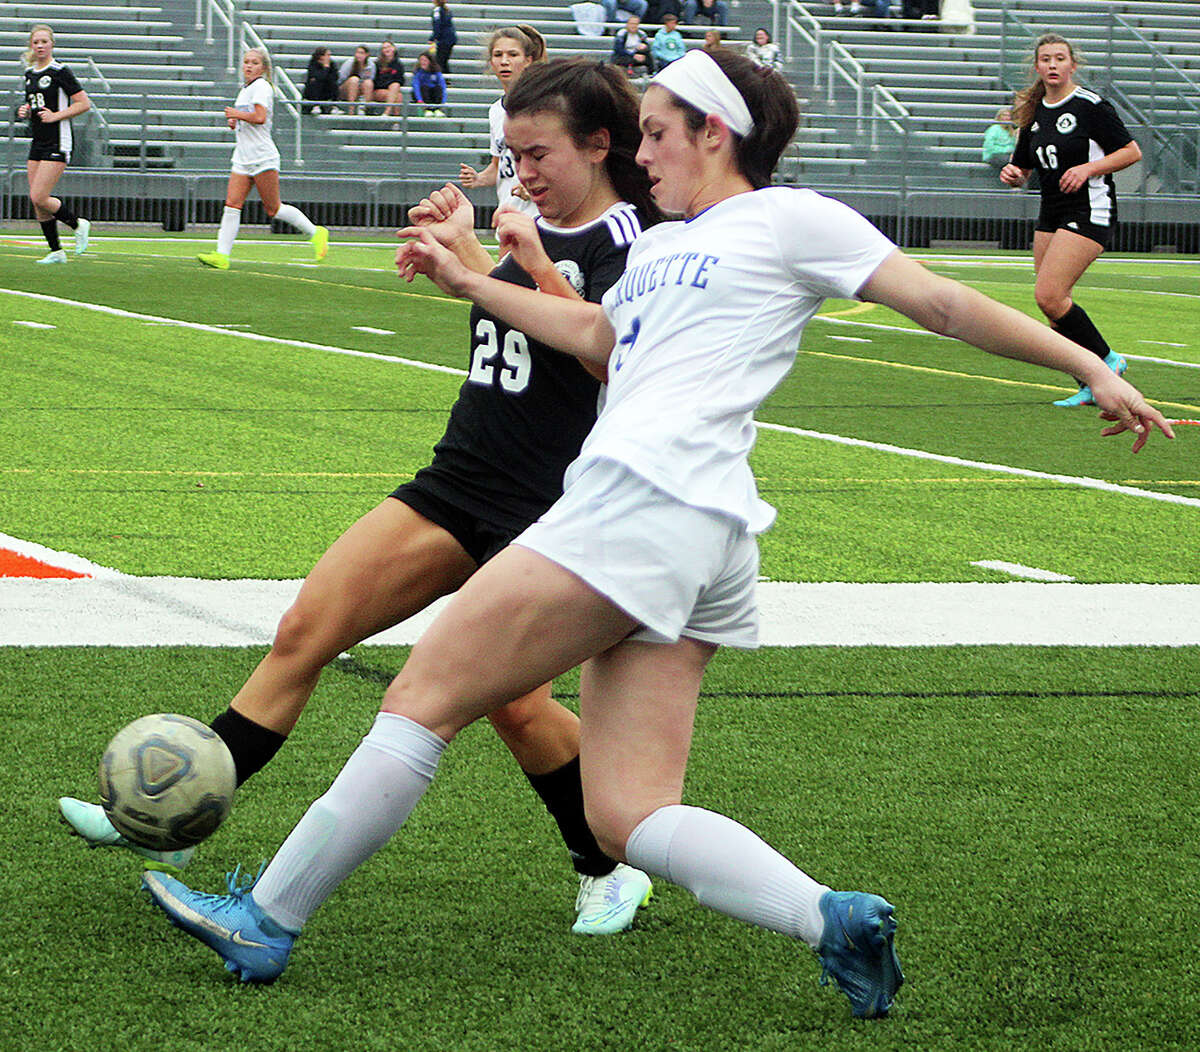 Claire Antrenner of Marquette, right, battles fort he ball with a Springfield player Monday during action in the Metro Cup Tournament at Edwardsville.